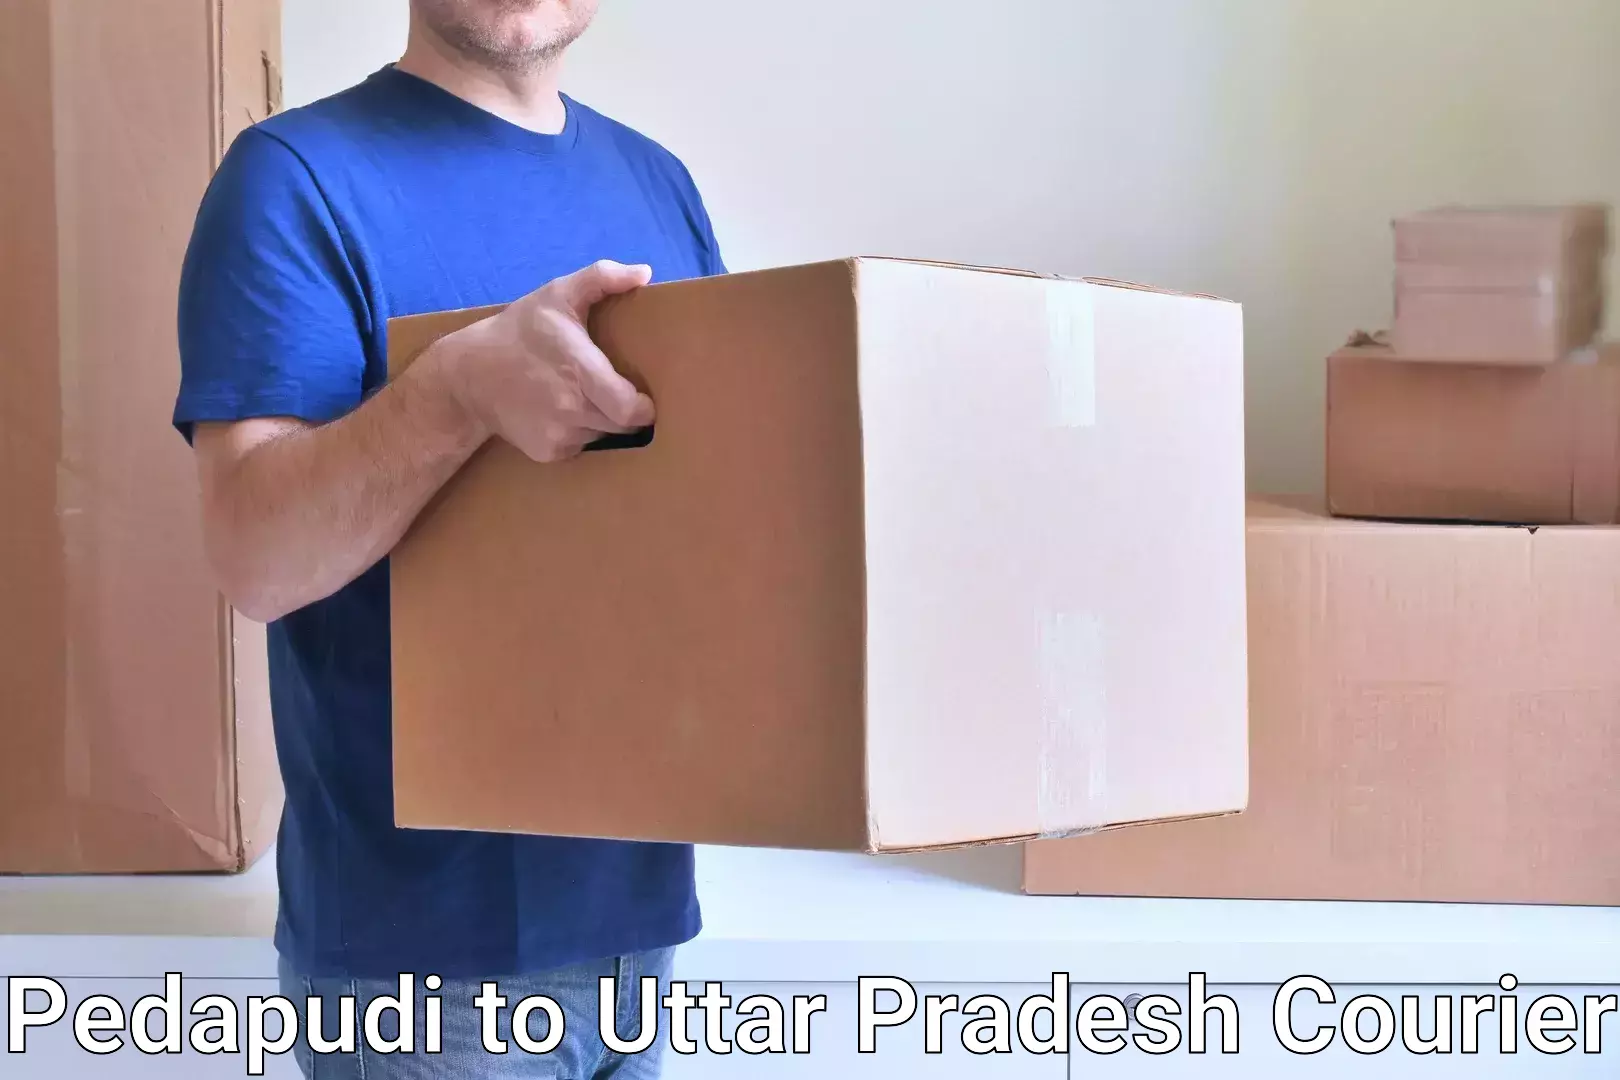 Large package courier Pedapudi to Dibai